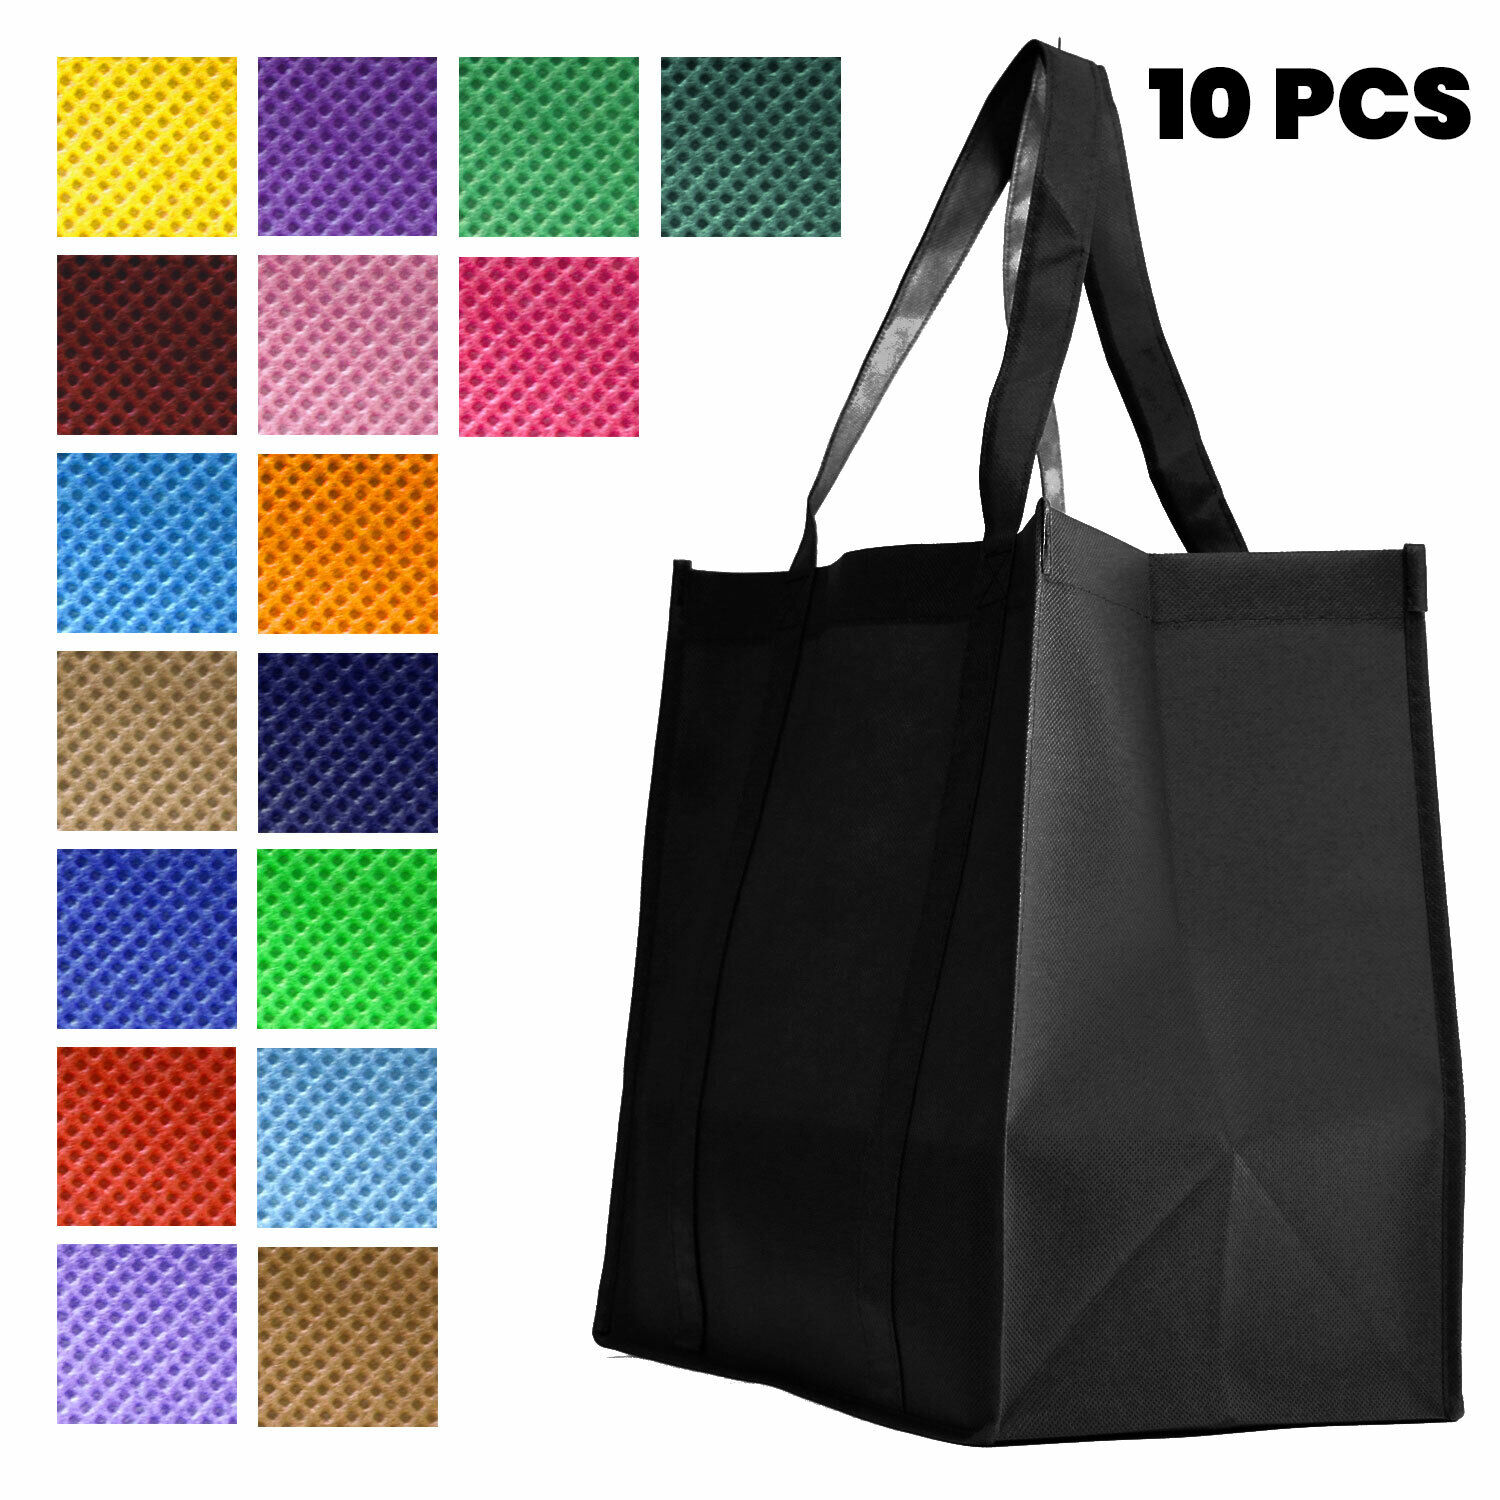 [10 PACK] HEAVY DUTY Reusable Large Non-Woven Tote Grocery S